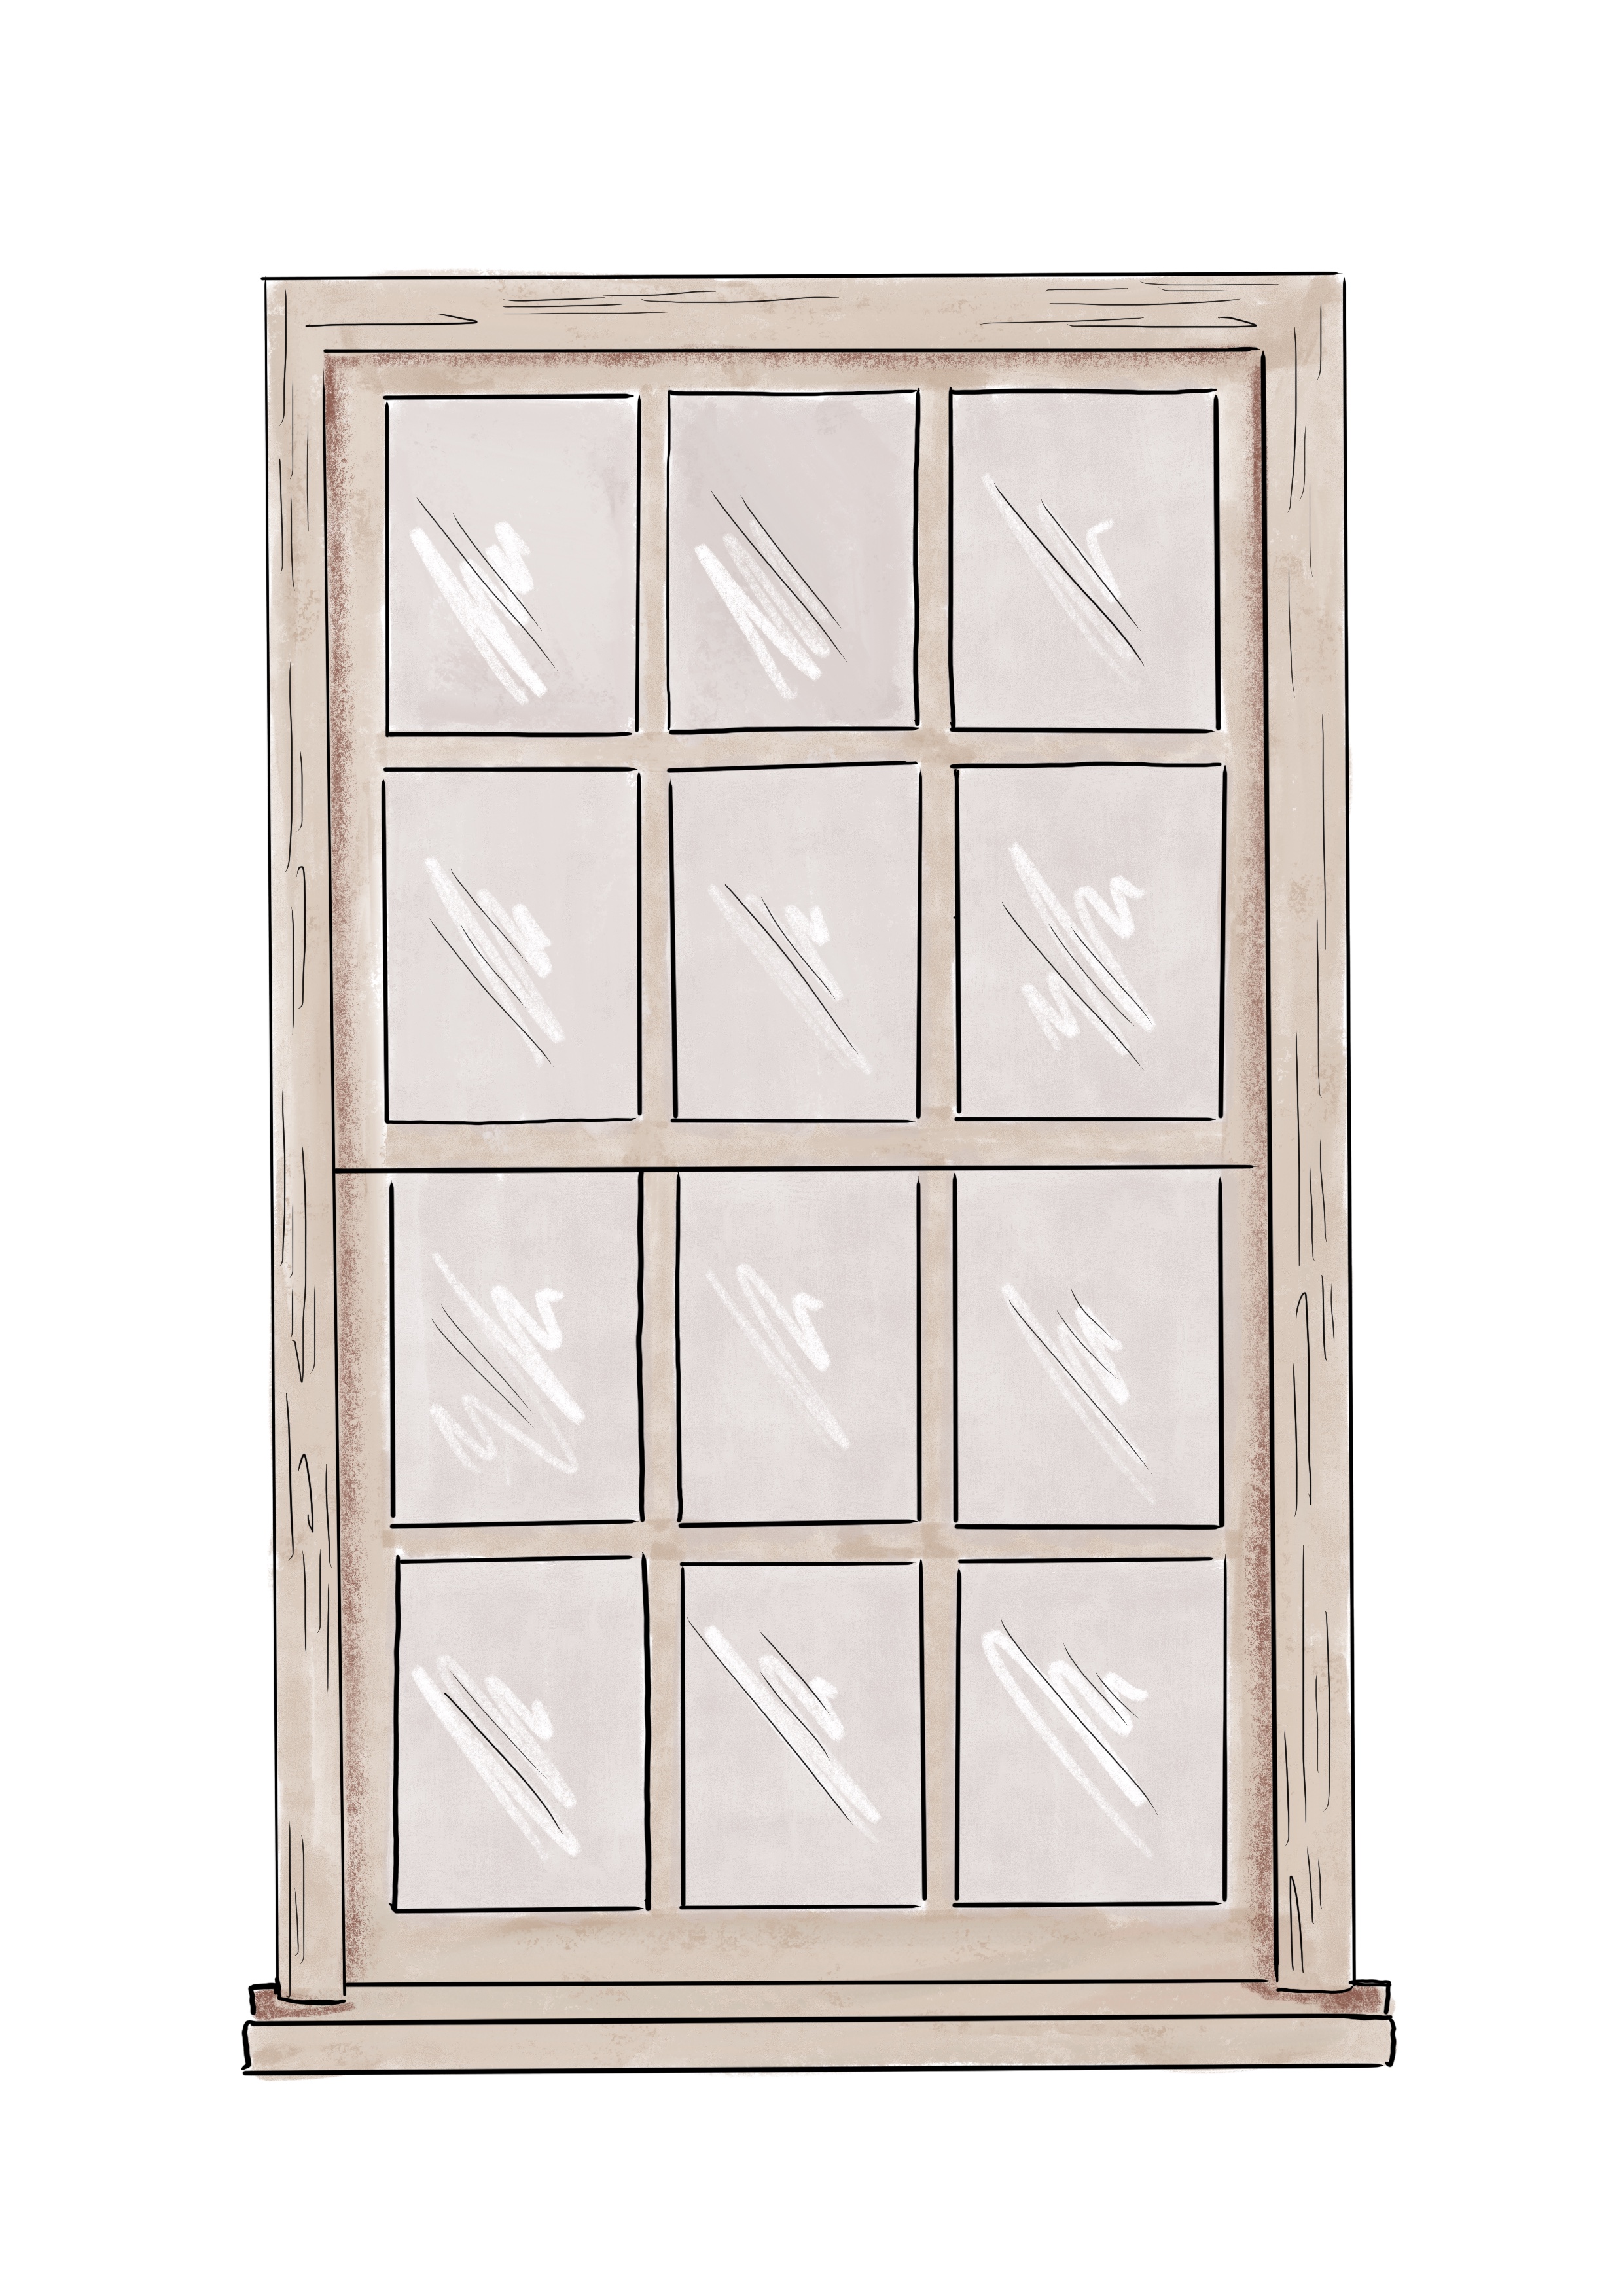 The twelve pane double hung sash window. Early examples often have heavy glazing bars. About 1690-1850 sash windows were produced without 'horns'.